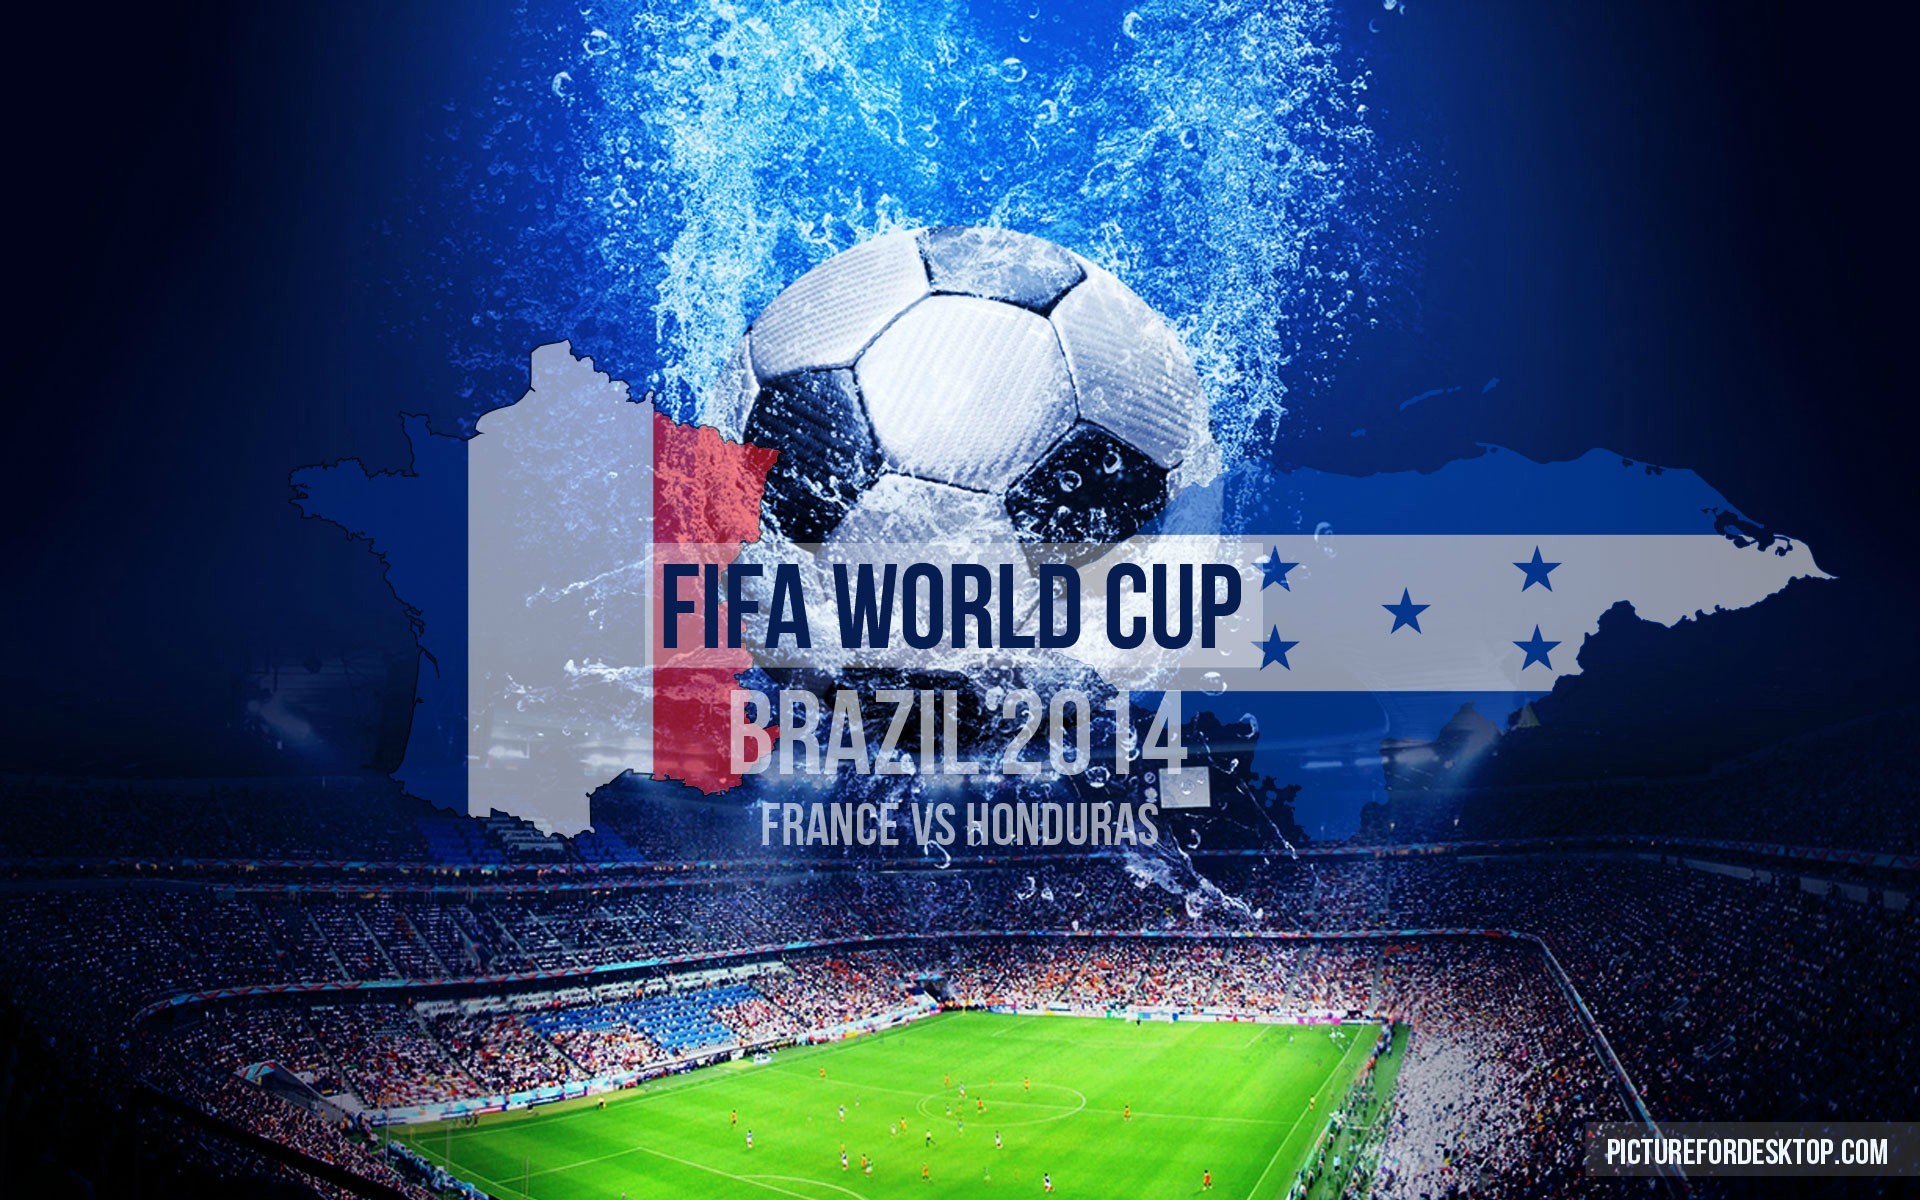 1920x1200 France vs Honduras wallpaper | Schedule of game | PosterPicture for .